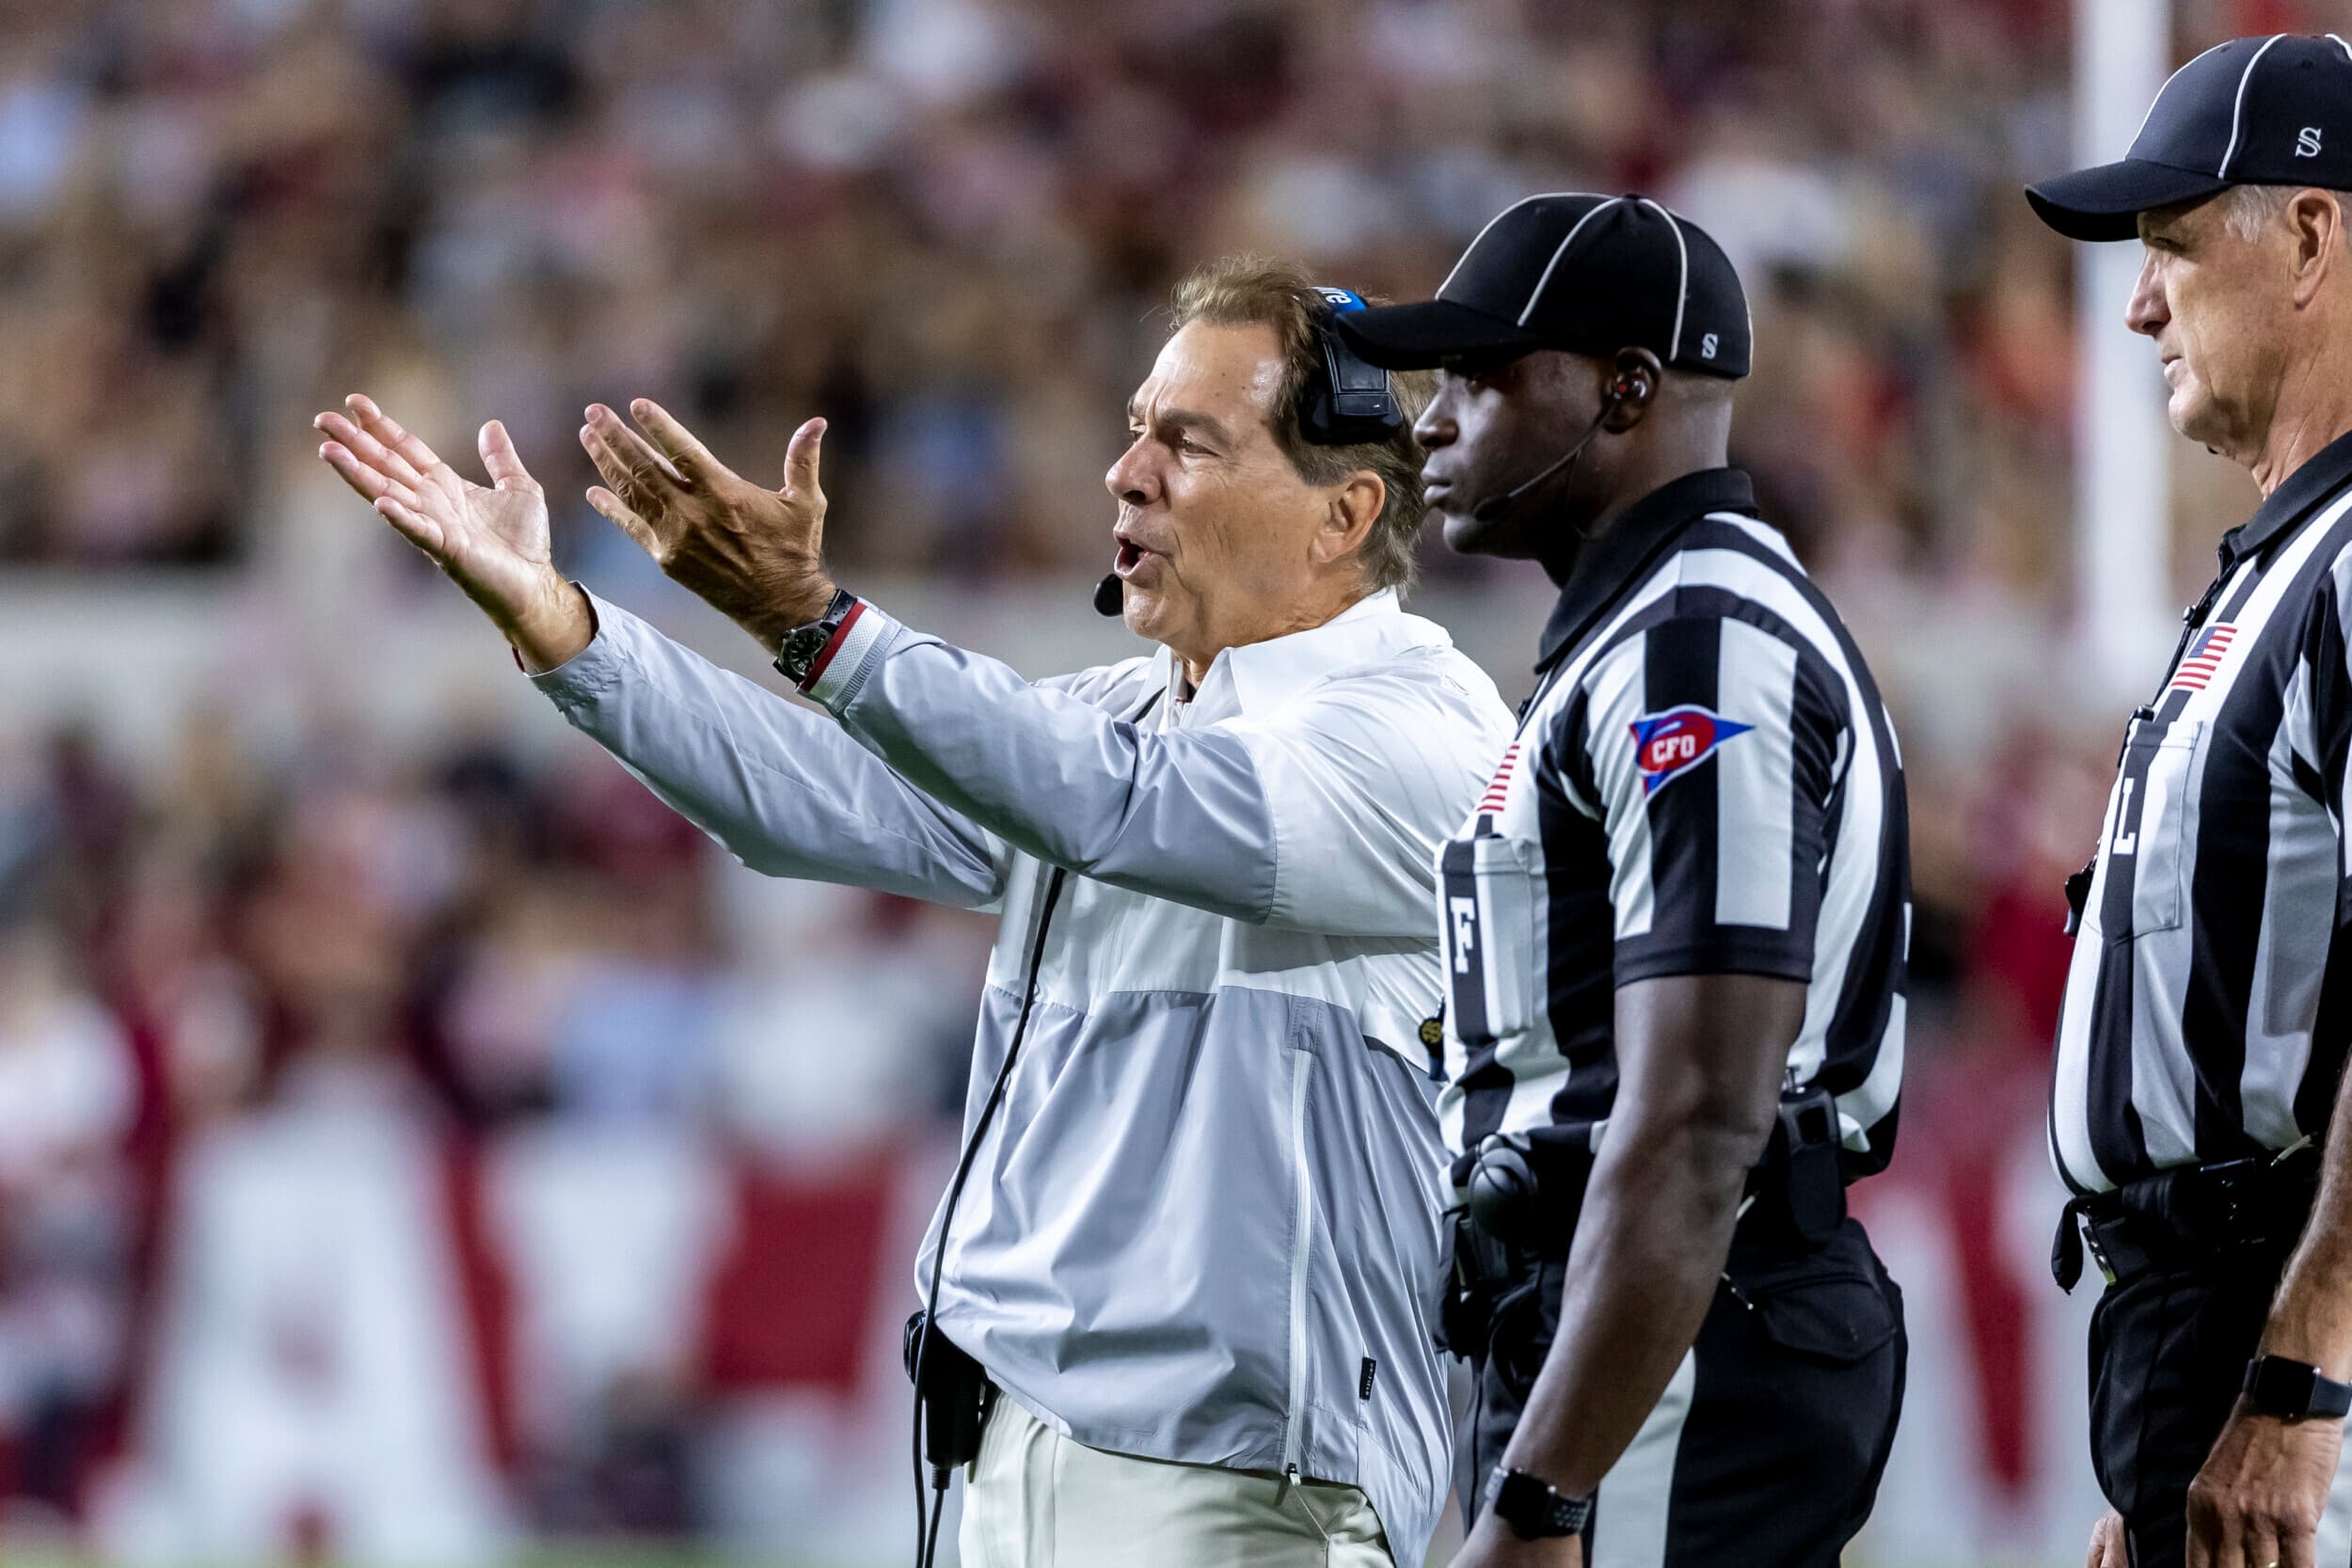 Alabama head coach Nick Saban argues a call during the second half of an NCAA college football game against Texas A&M, Saturday, Oct. 8, 2022, in Tuscaloosa, Ala.